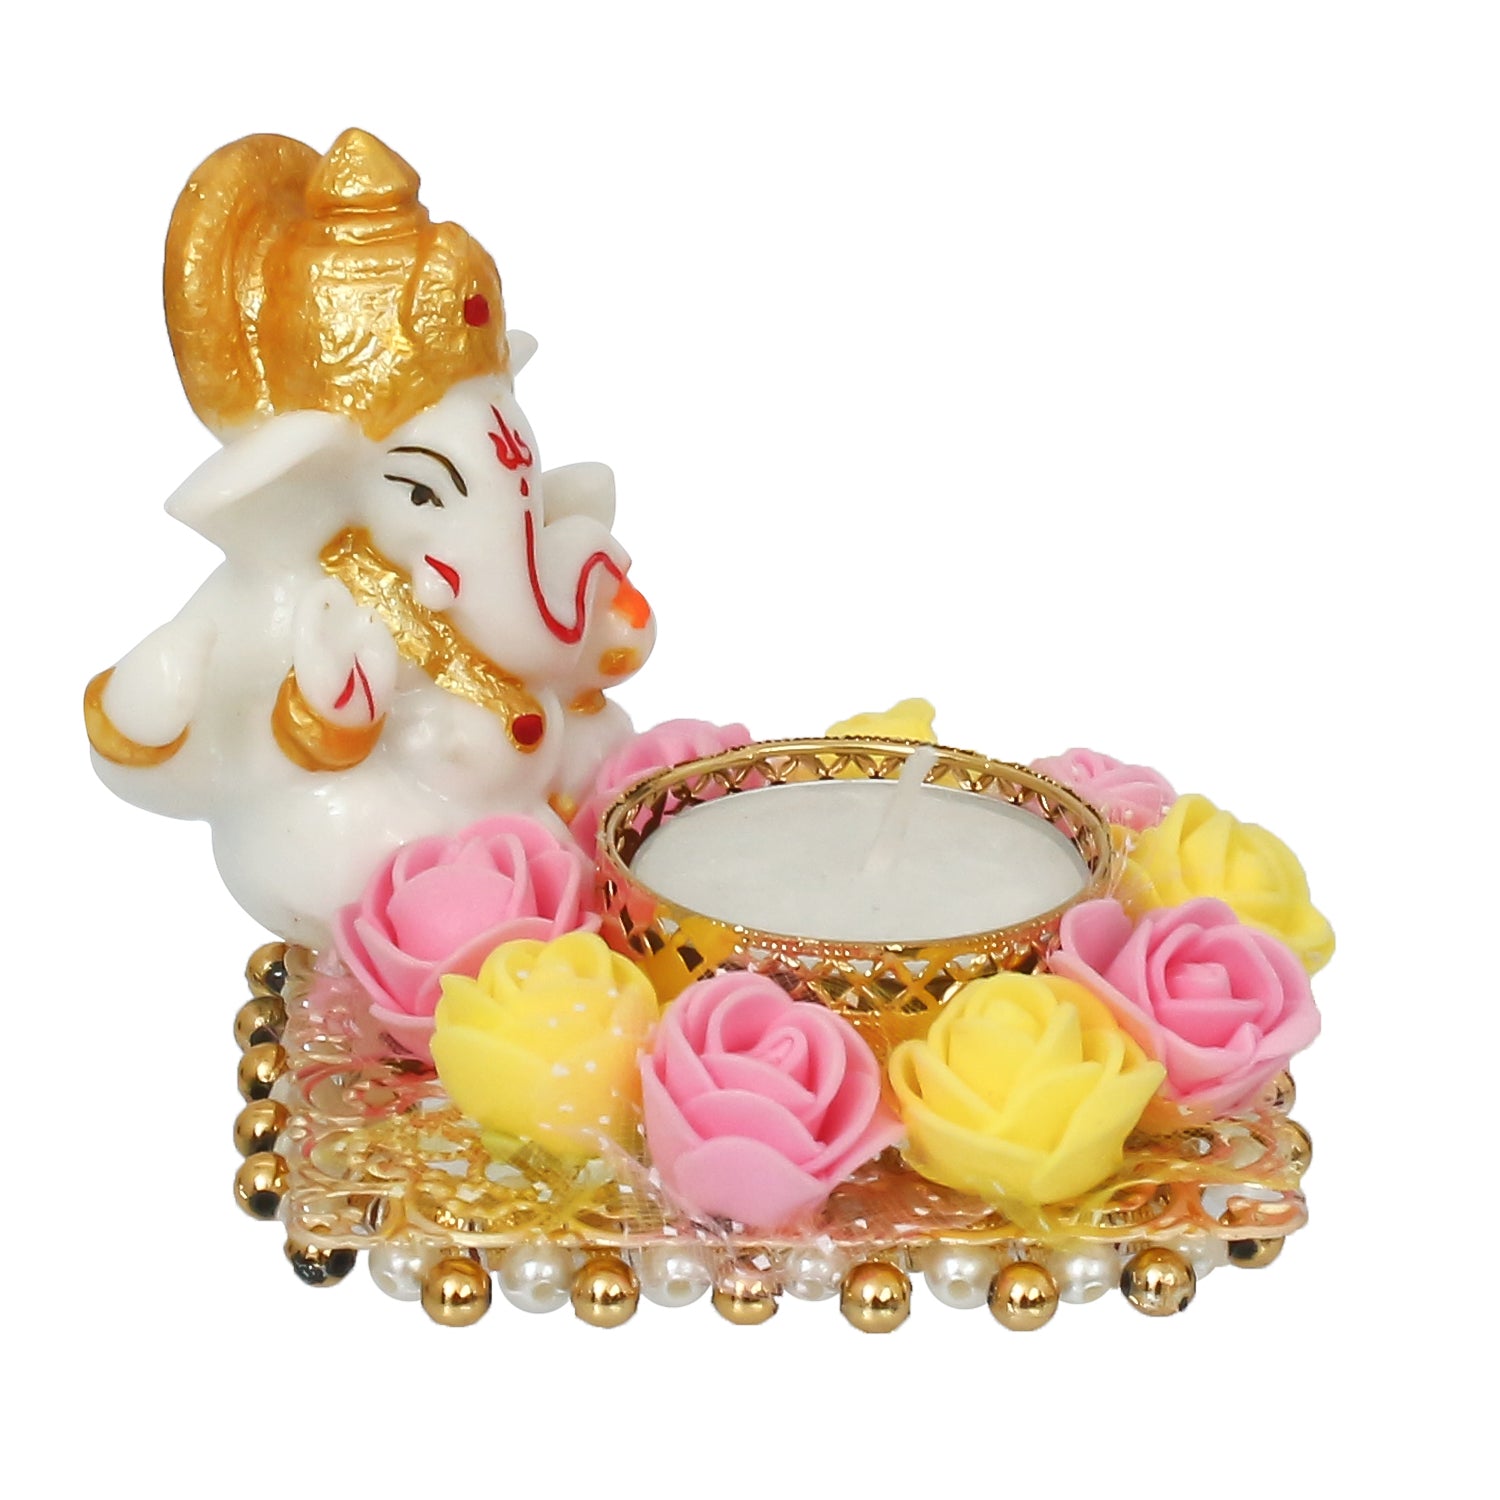 Polyresin Lord Ganesha Idol on Decorative Metal Plate with Tea Light Holder (Pink, Yellow and White) 3